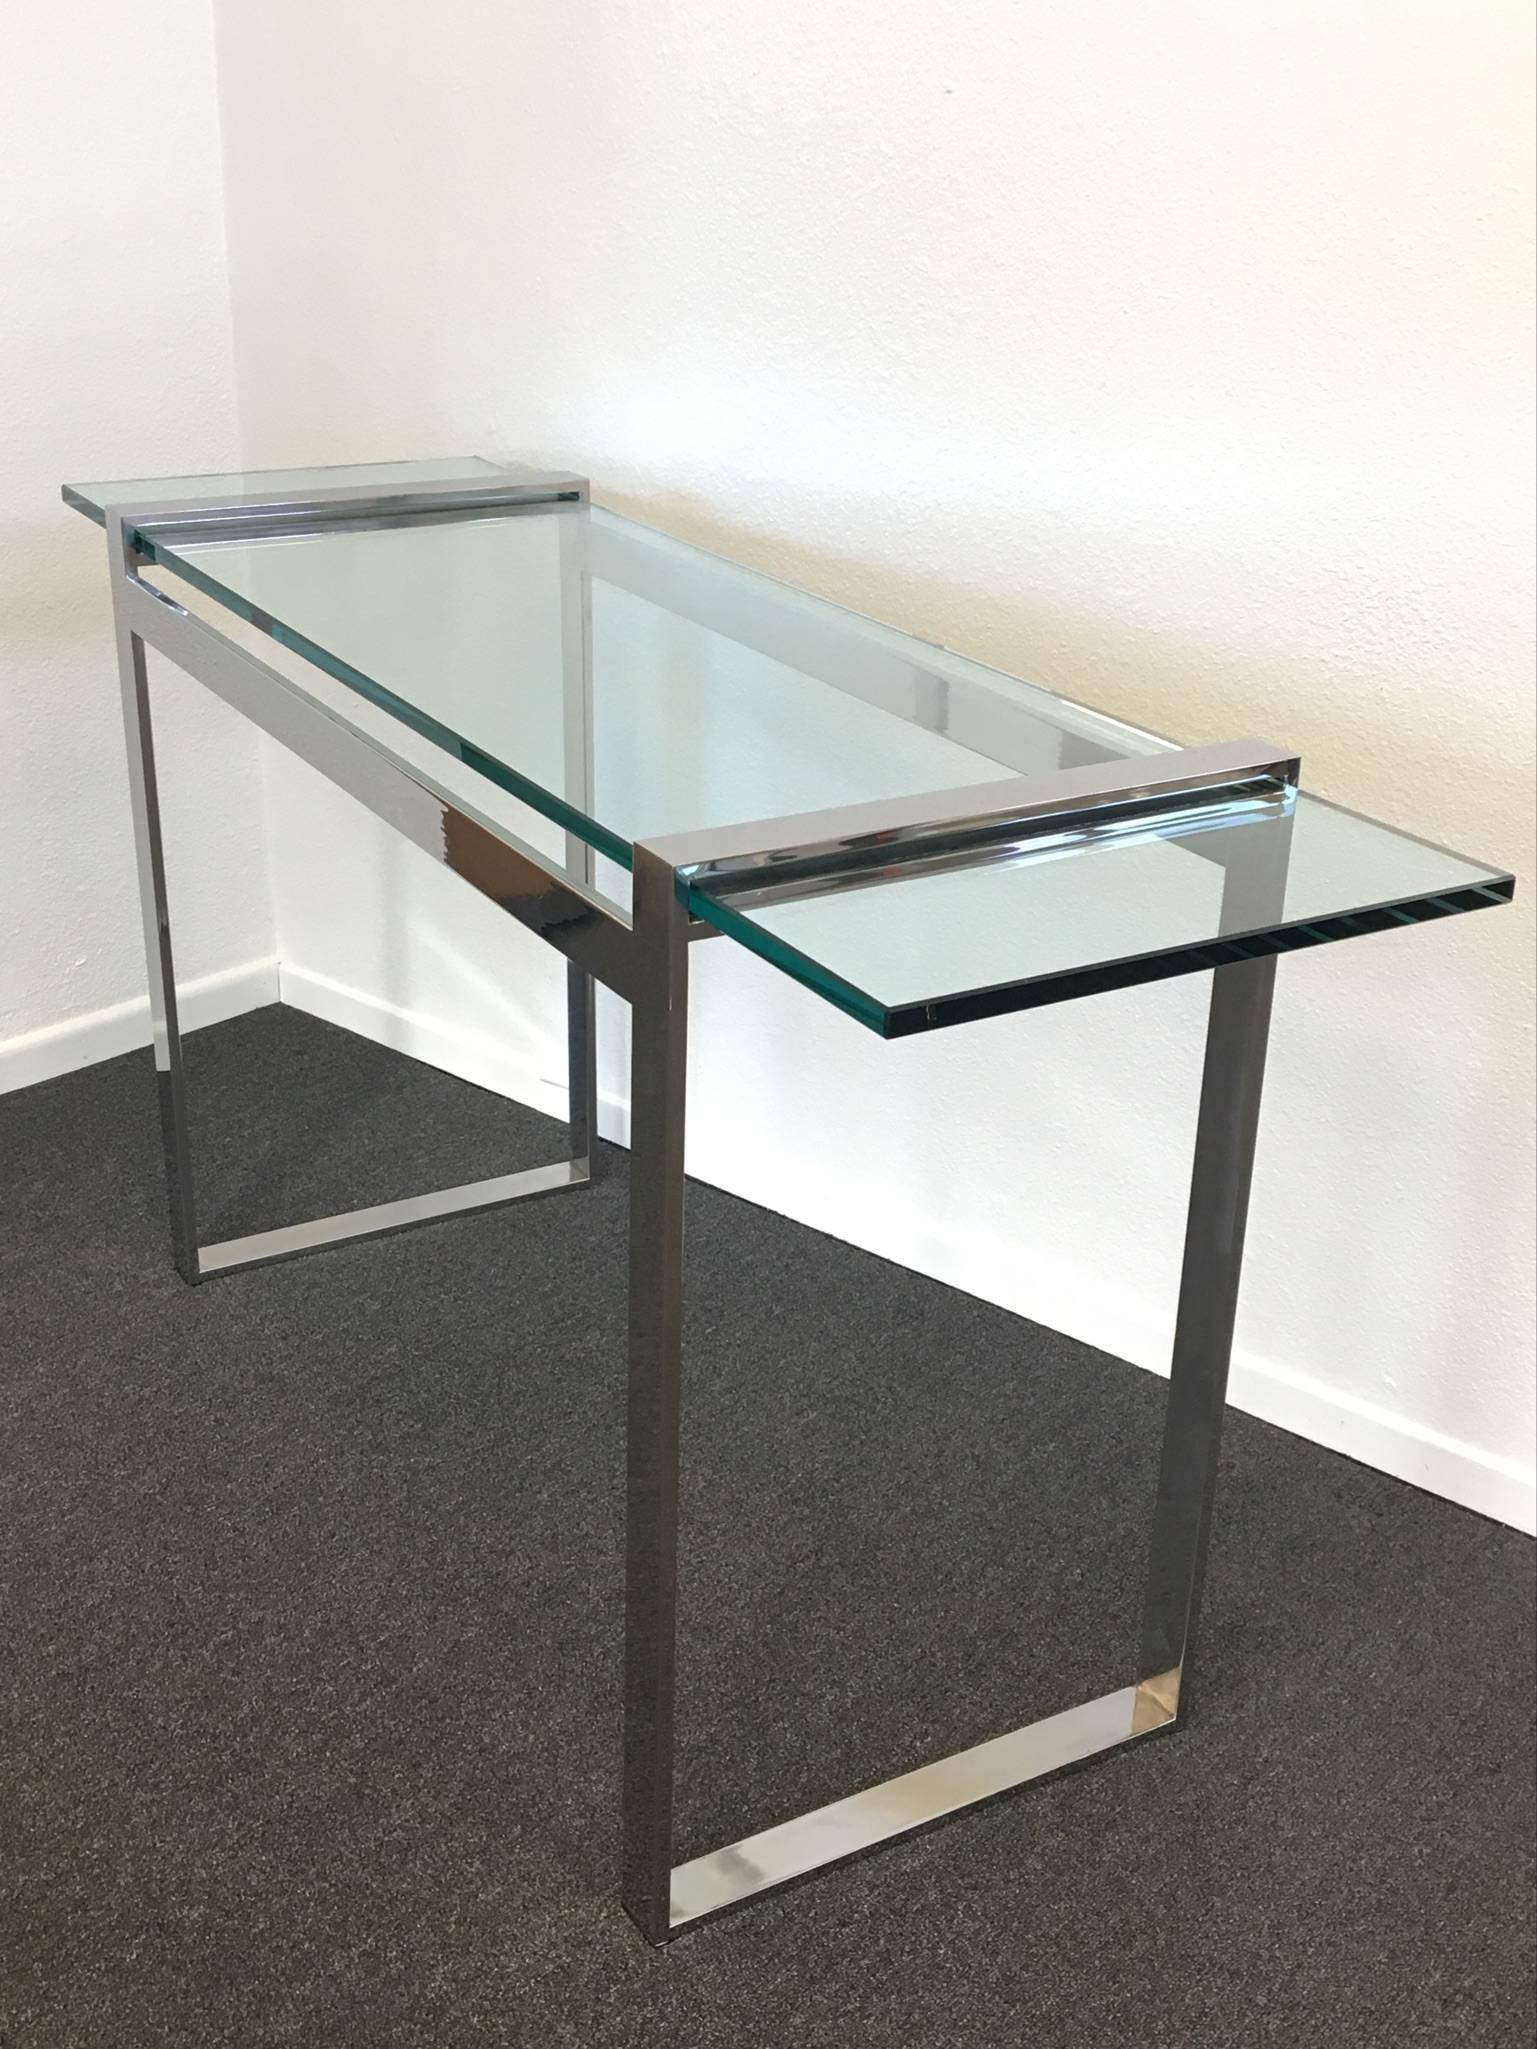 A simple and glamorous nickel and glass console table by Charles Hollis Jones from 